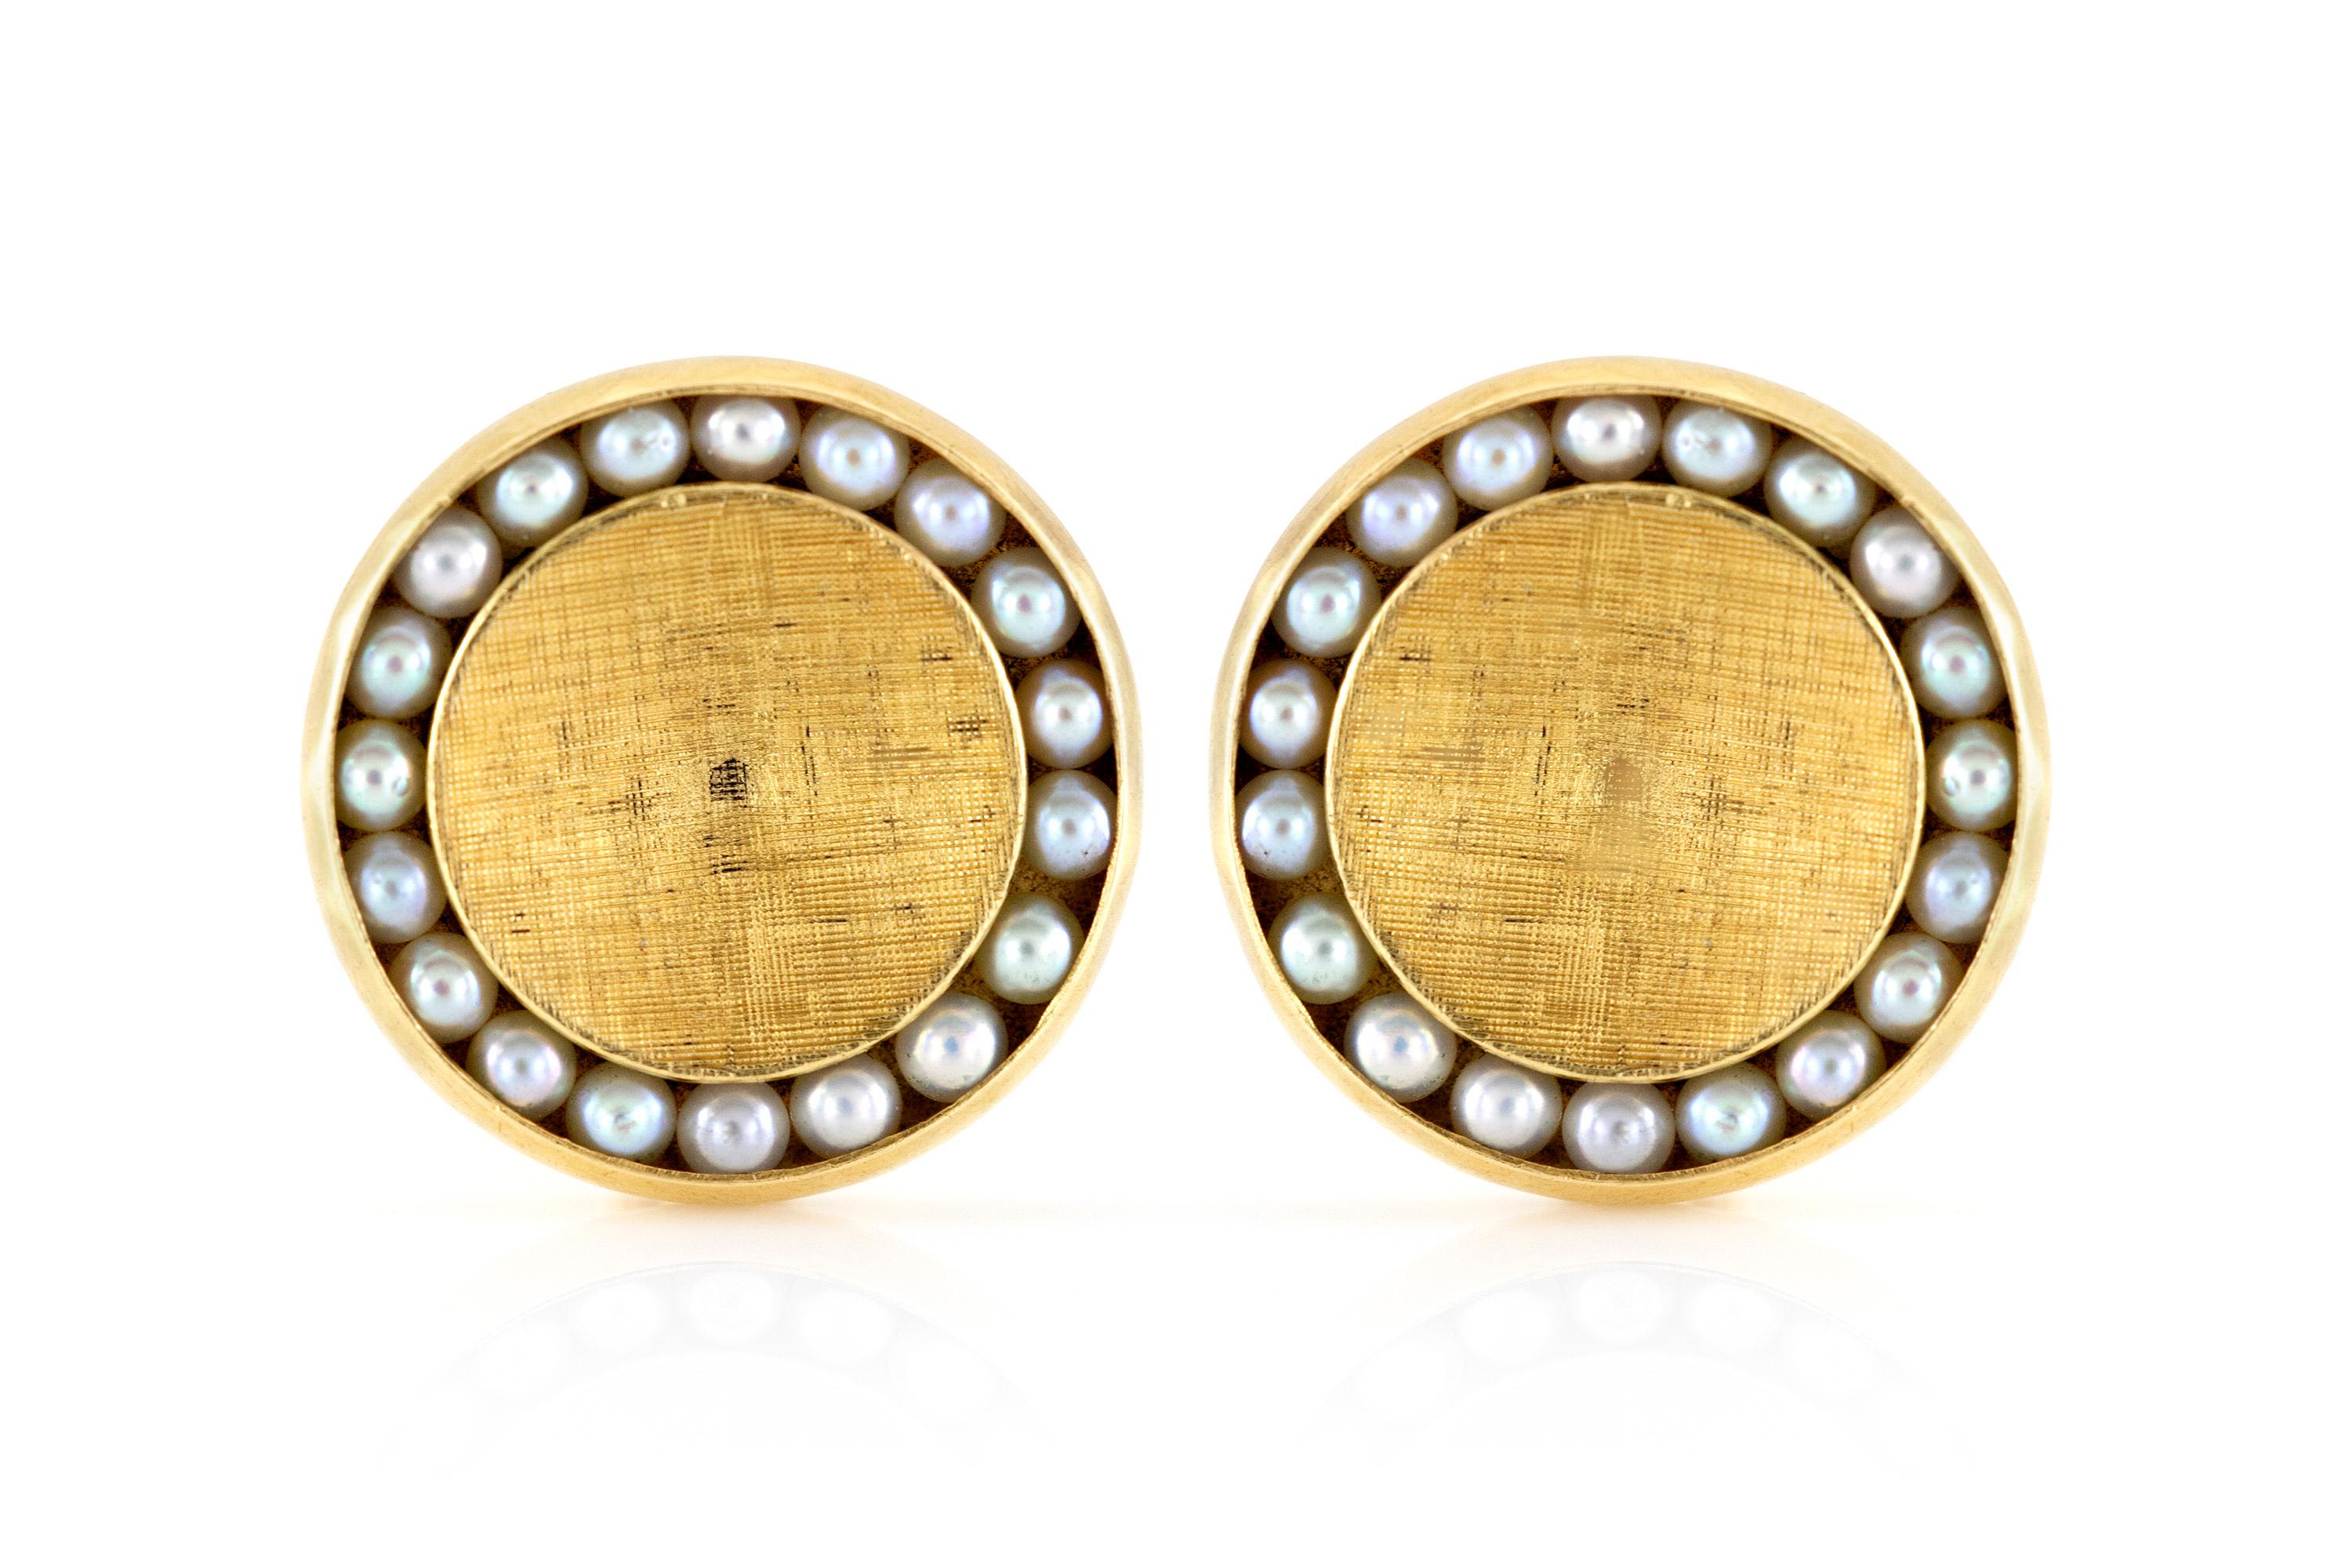 Cufflinks finely crafted in 14k yellow gold, weighing 12 dwt., size of each cufflink is 1.15 inch. Circa 1960.